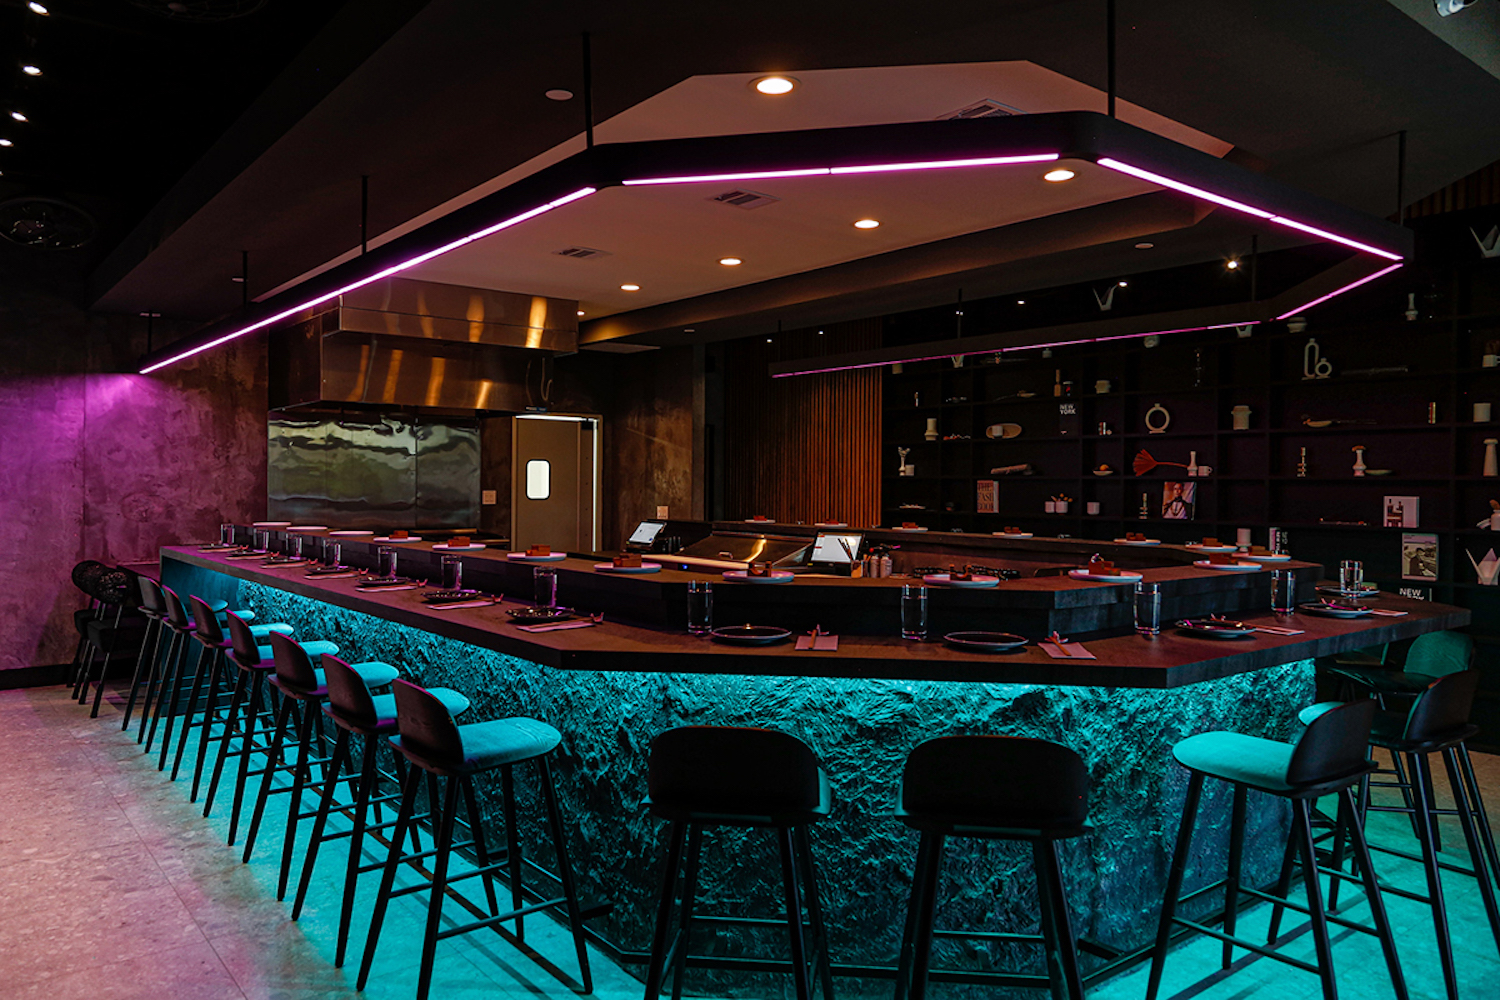 Dark bar area with neon purple and blue